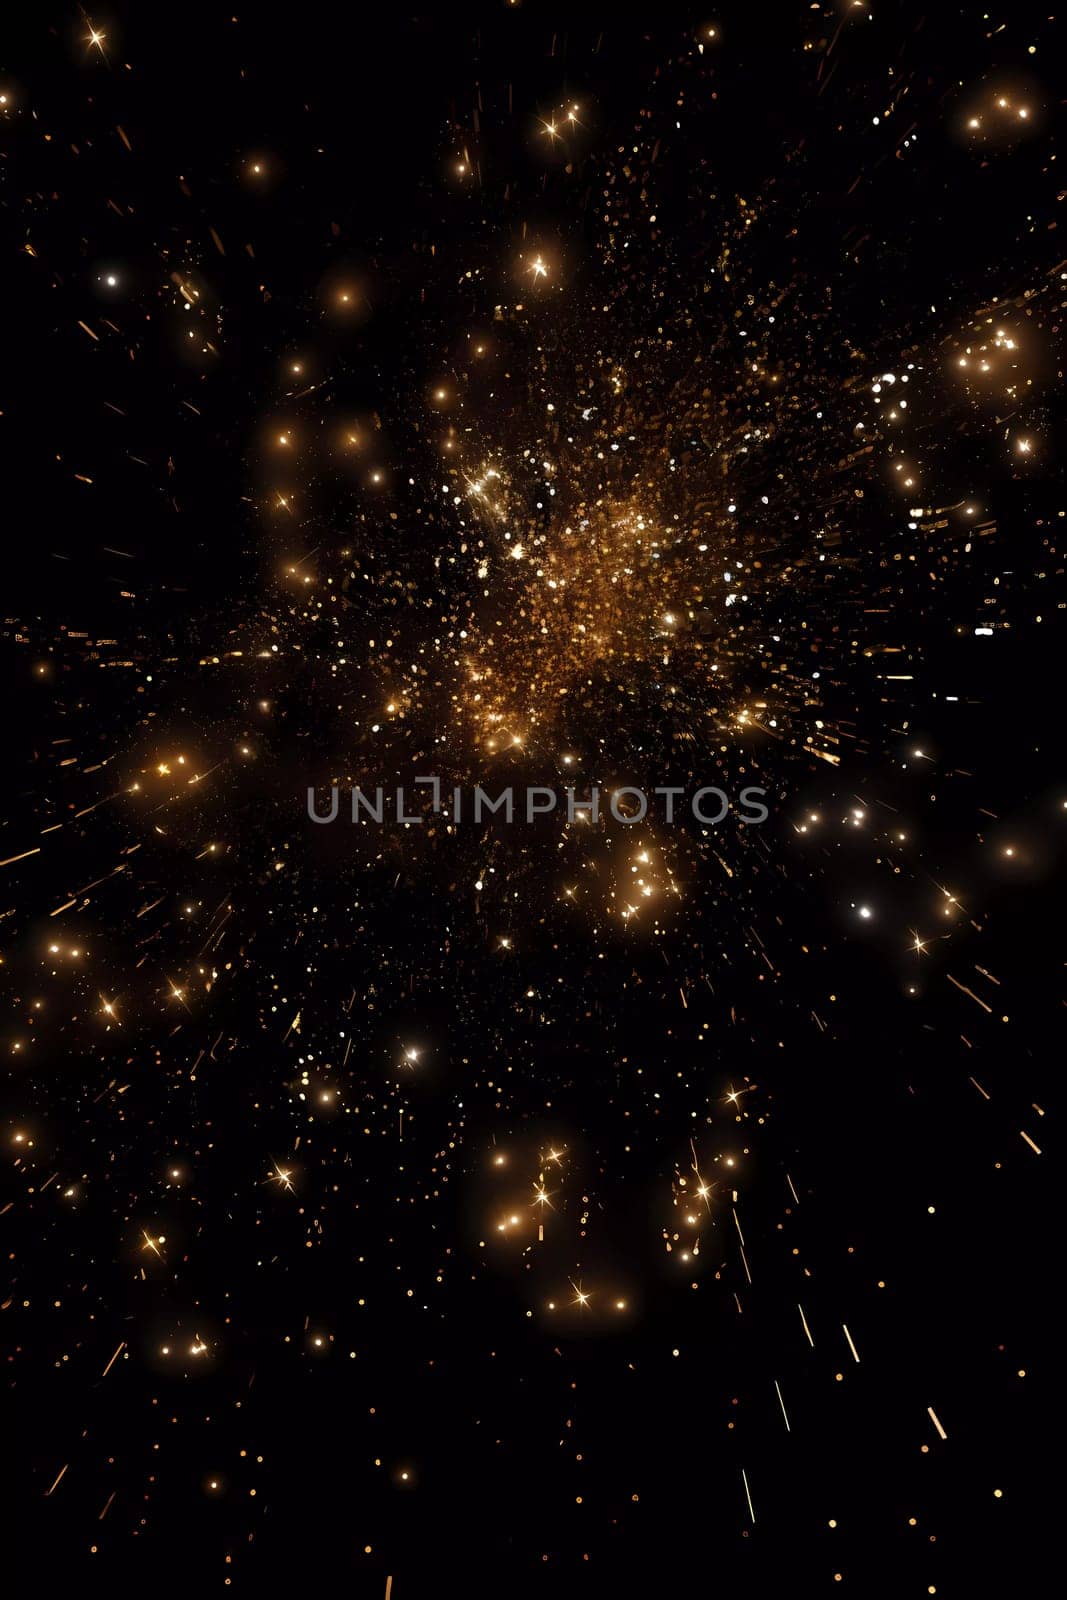 Dark background with golden glowing. Small gold particles on a black background